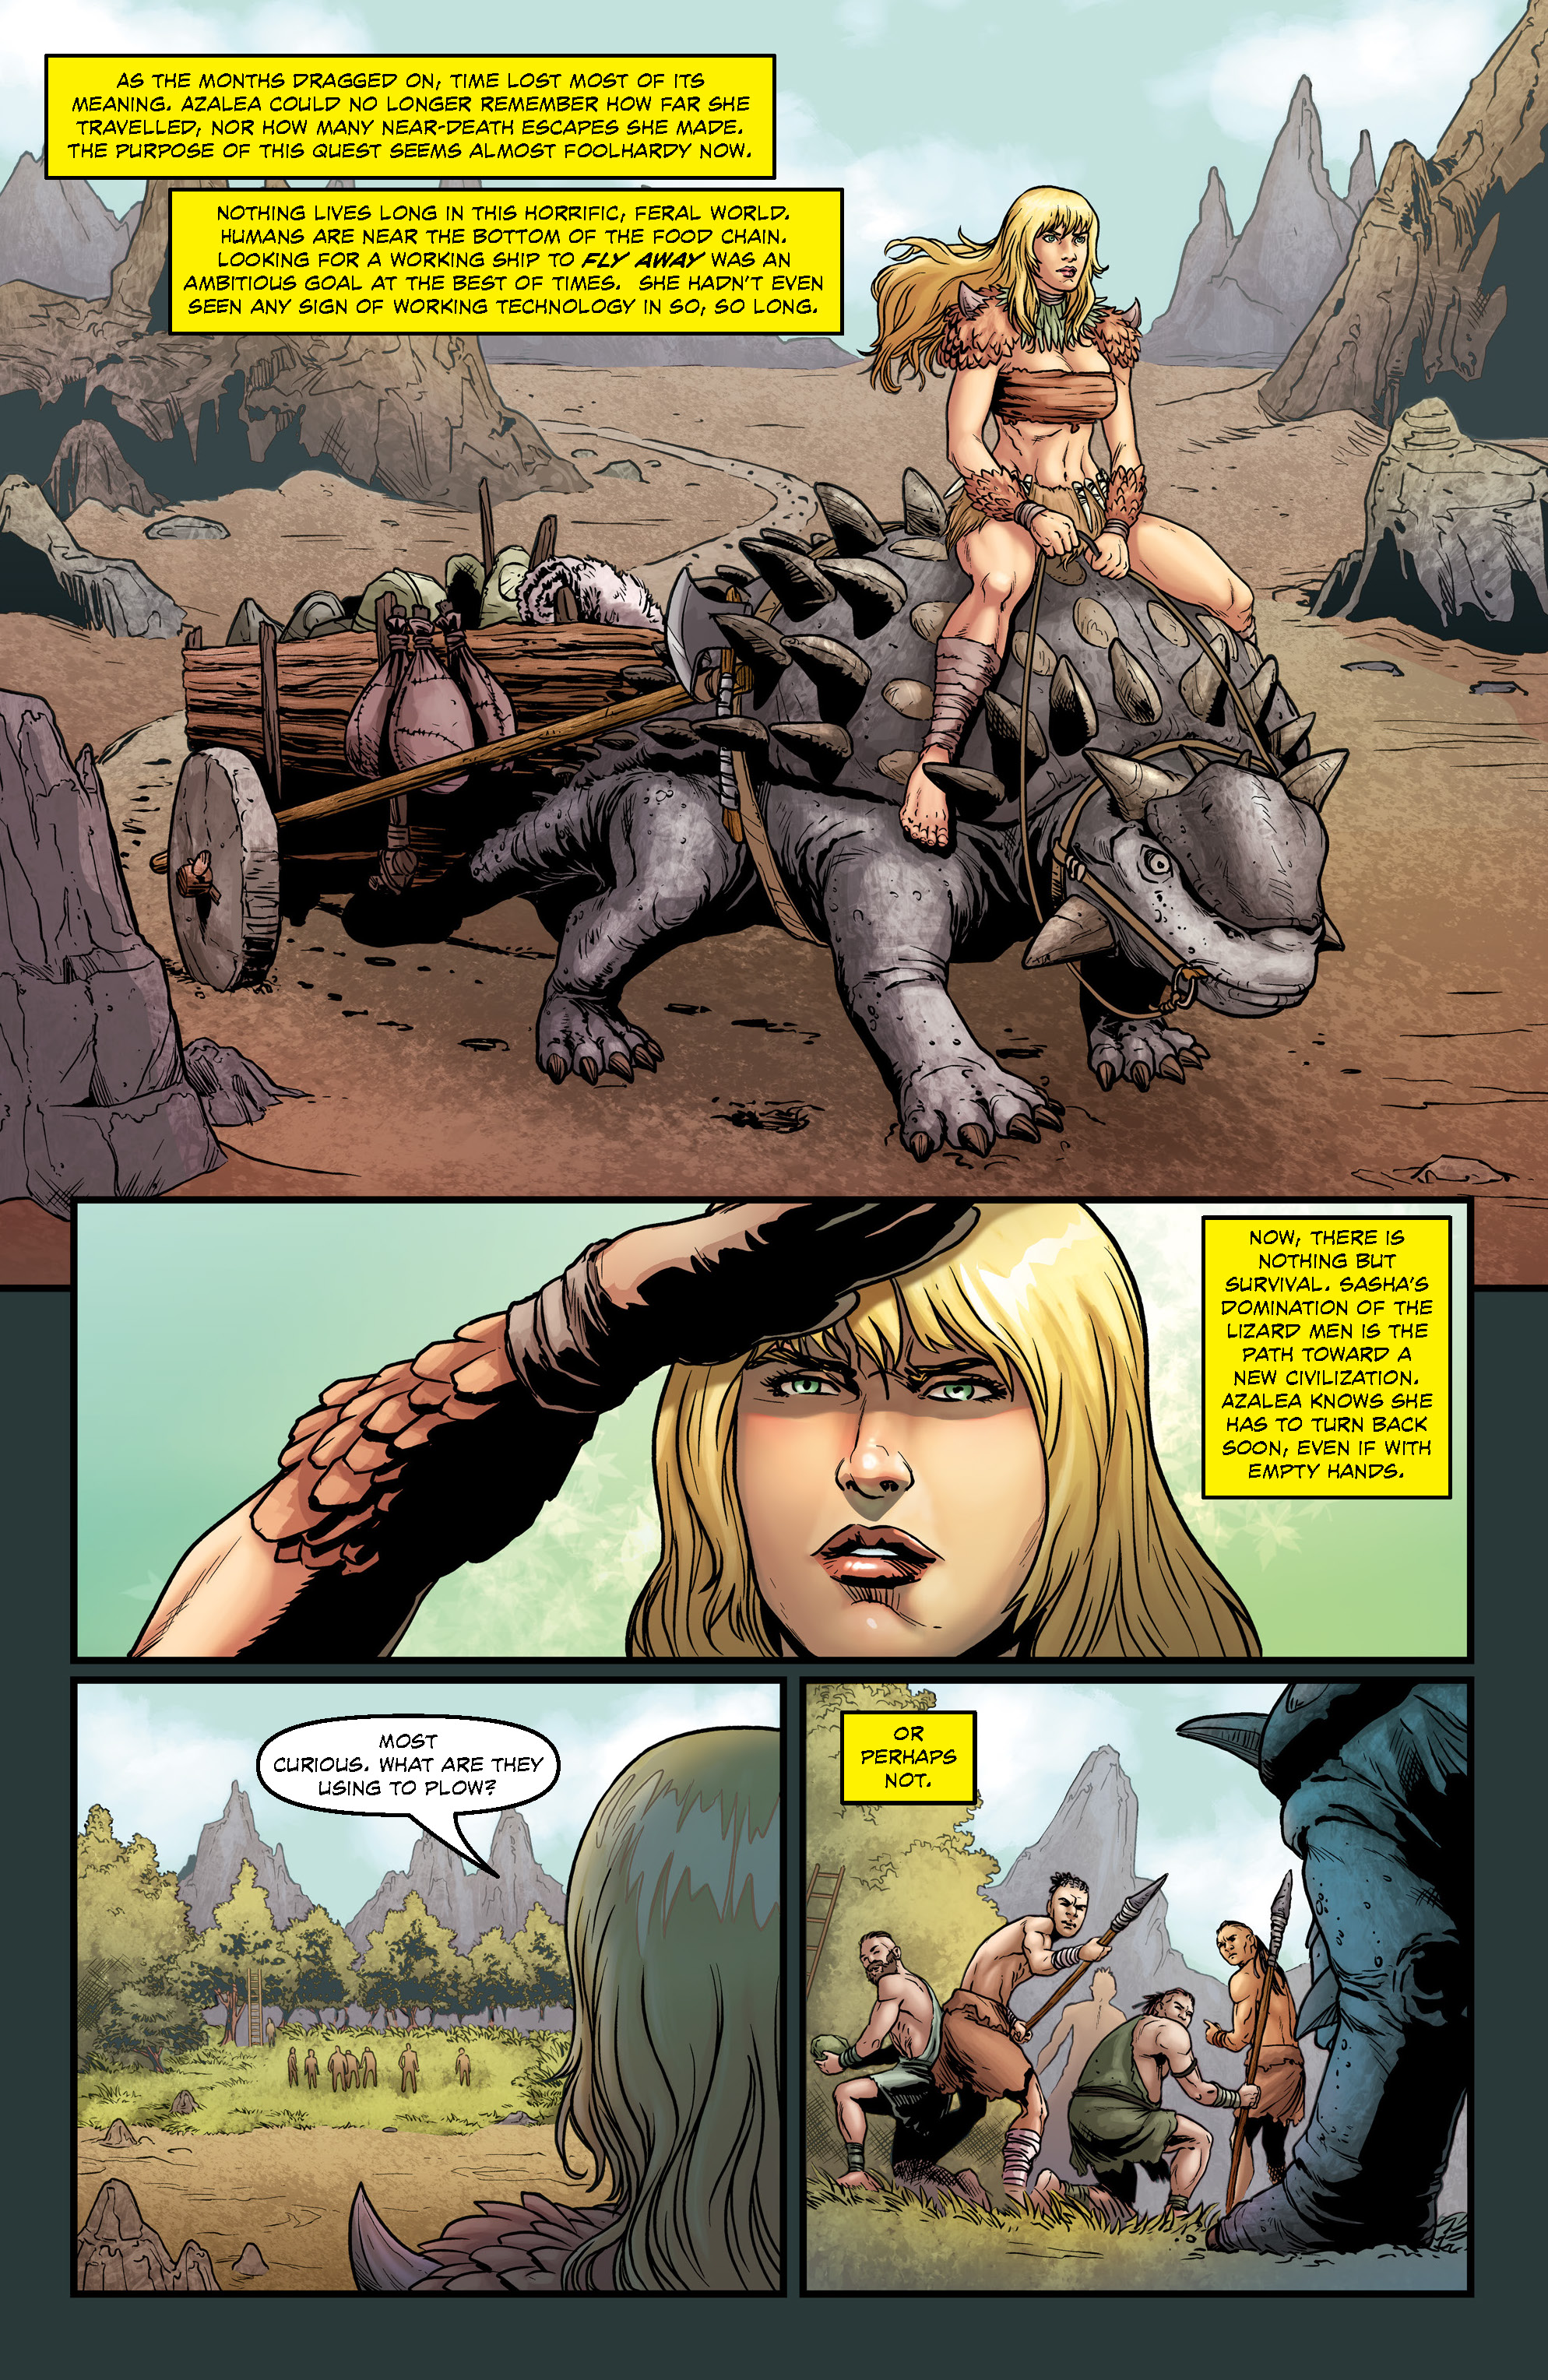 Jungle Fantasy Annual 2019 (ADULT): Chapter 1 - Page 4.